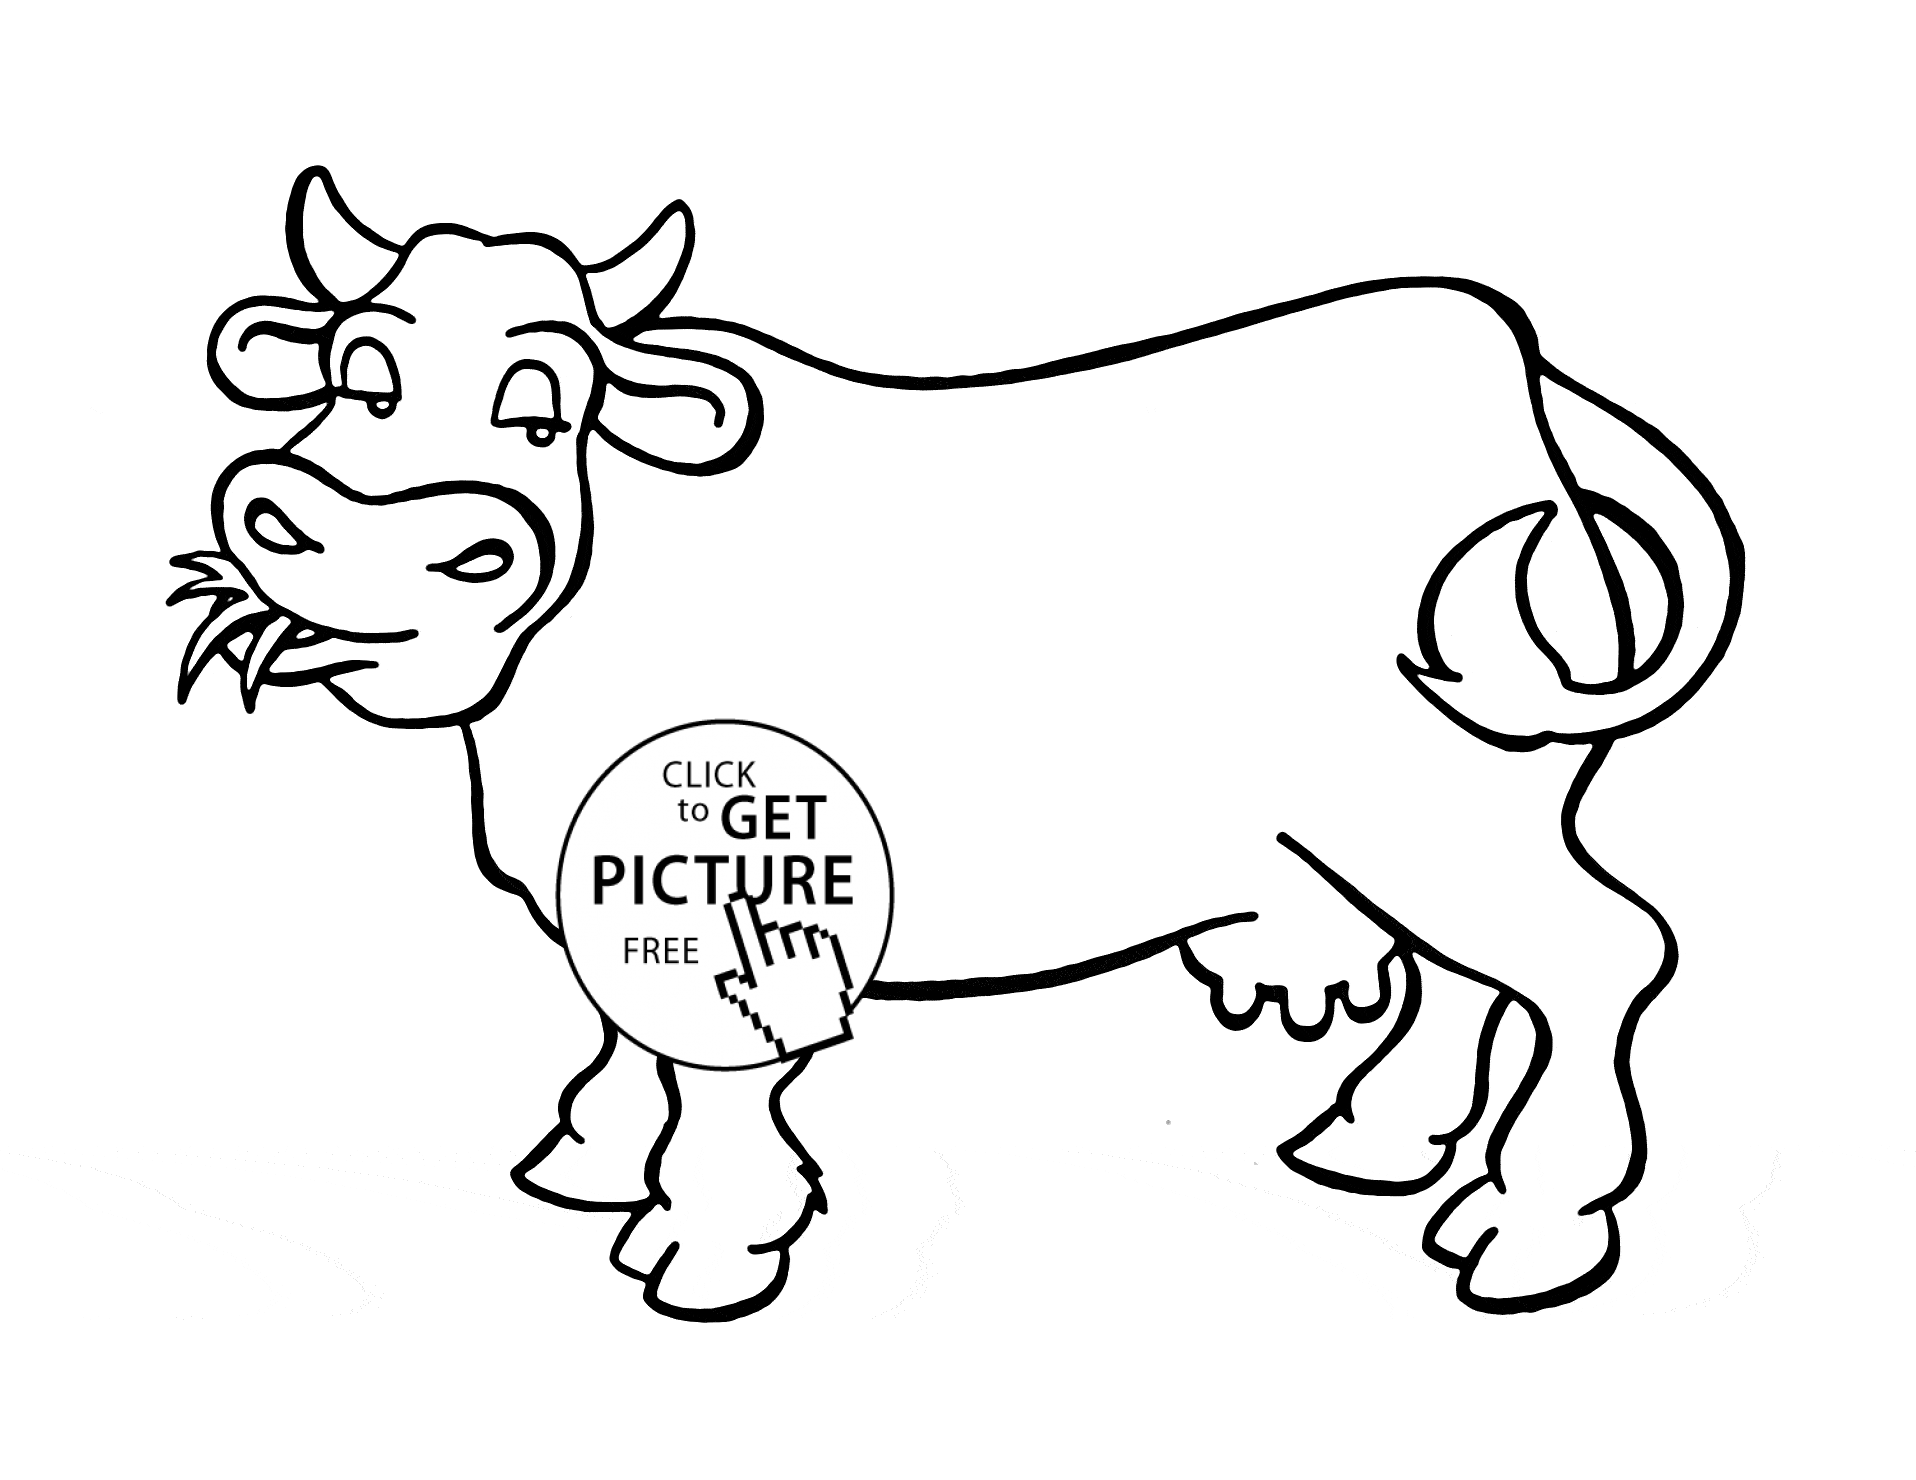 Free Cow Printable Coloring Pages, Download Free Cow Printable Coloring ...